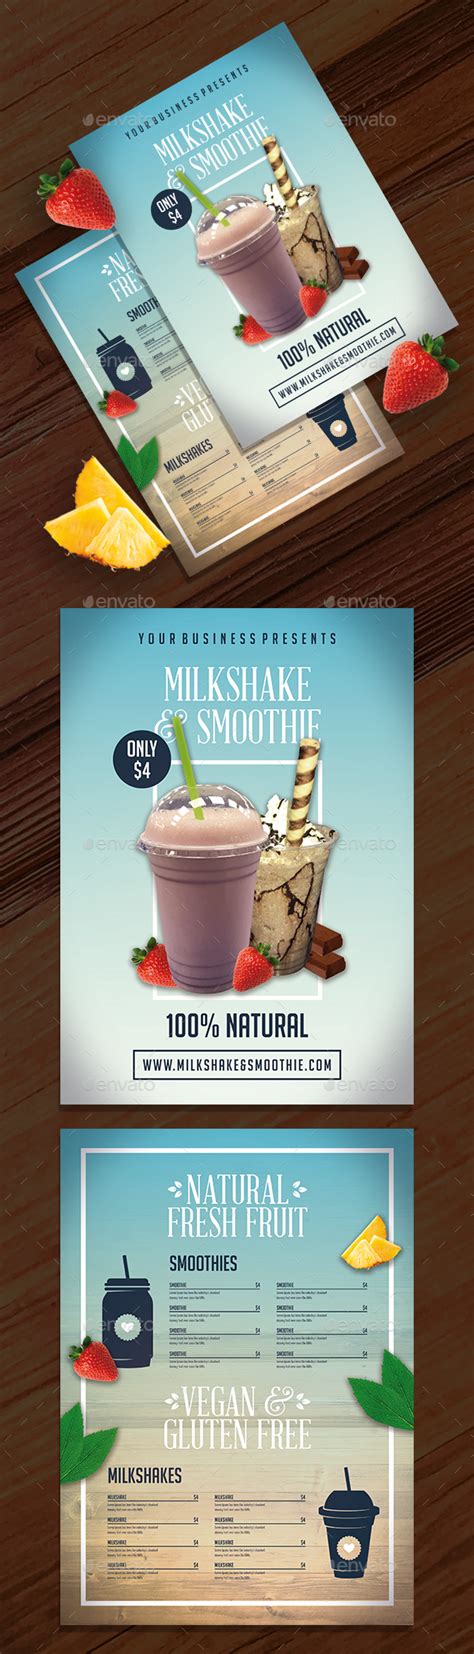 Milkshake And Smoothie Menu Template By Bosstwinsmusic Graphicriver